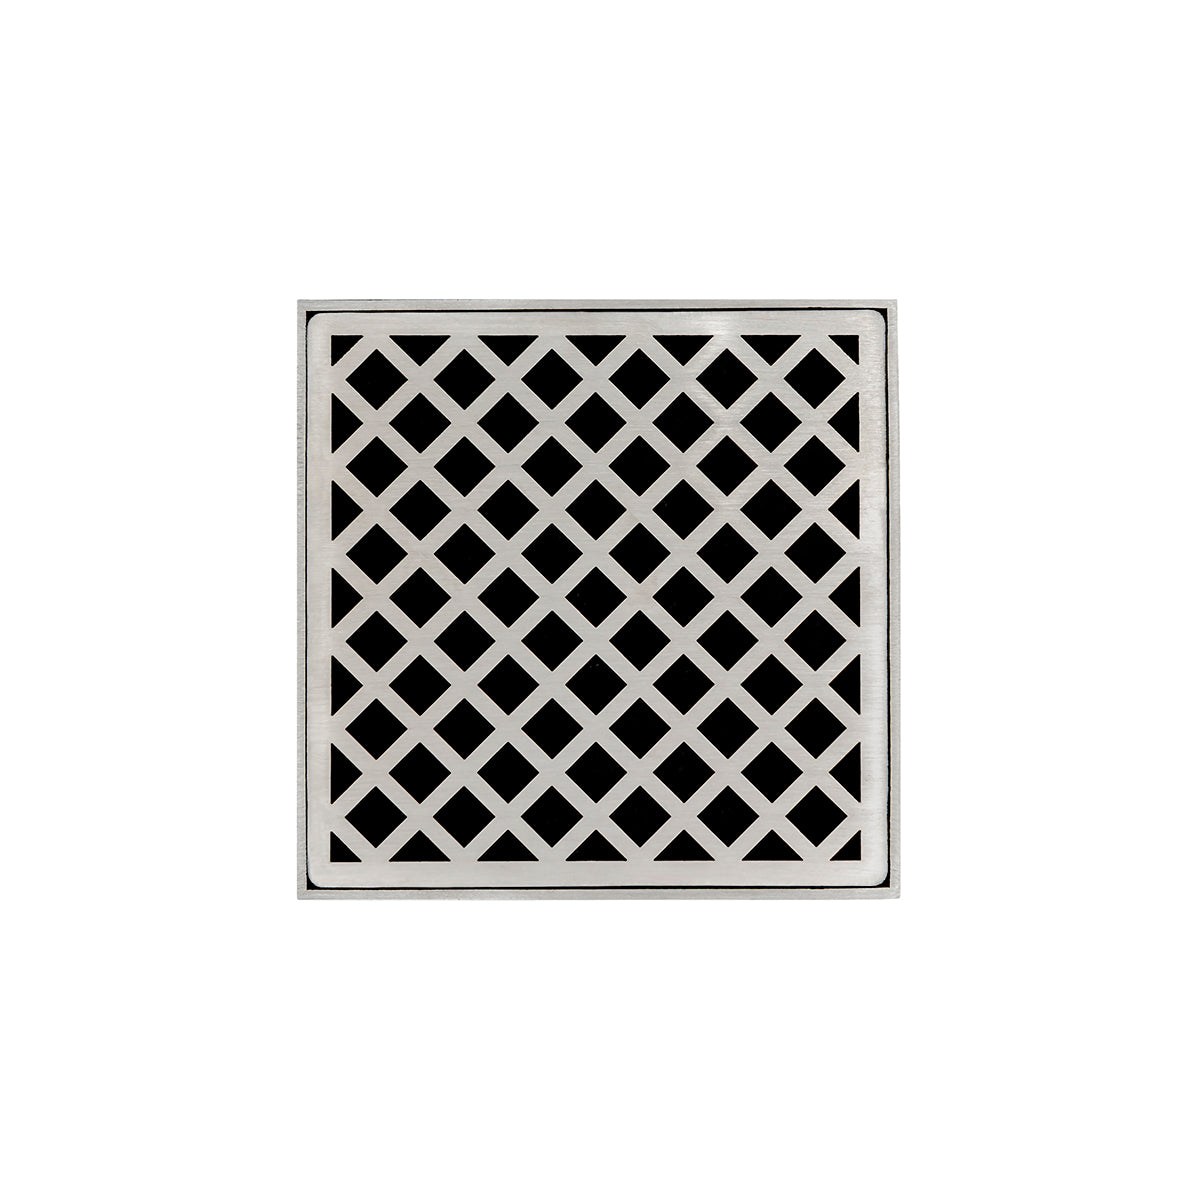 Infinity Drain 5" x 5" Strainer Premium Center Drain Kit with Criss-Cross Pattern Decorative Plate and 2" Throat for XD 5